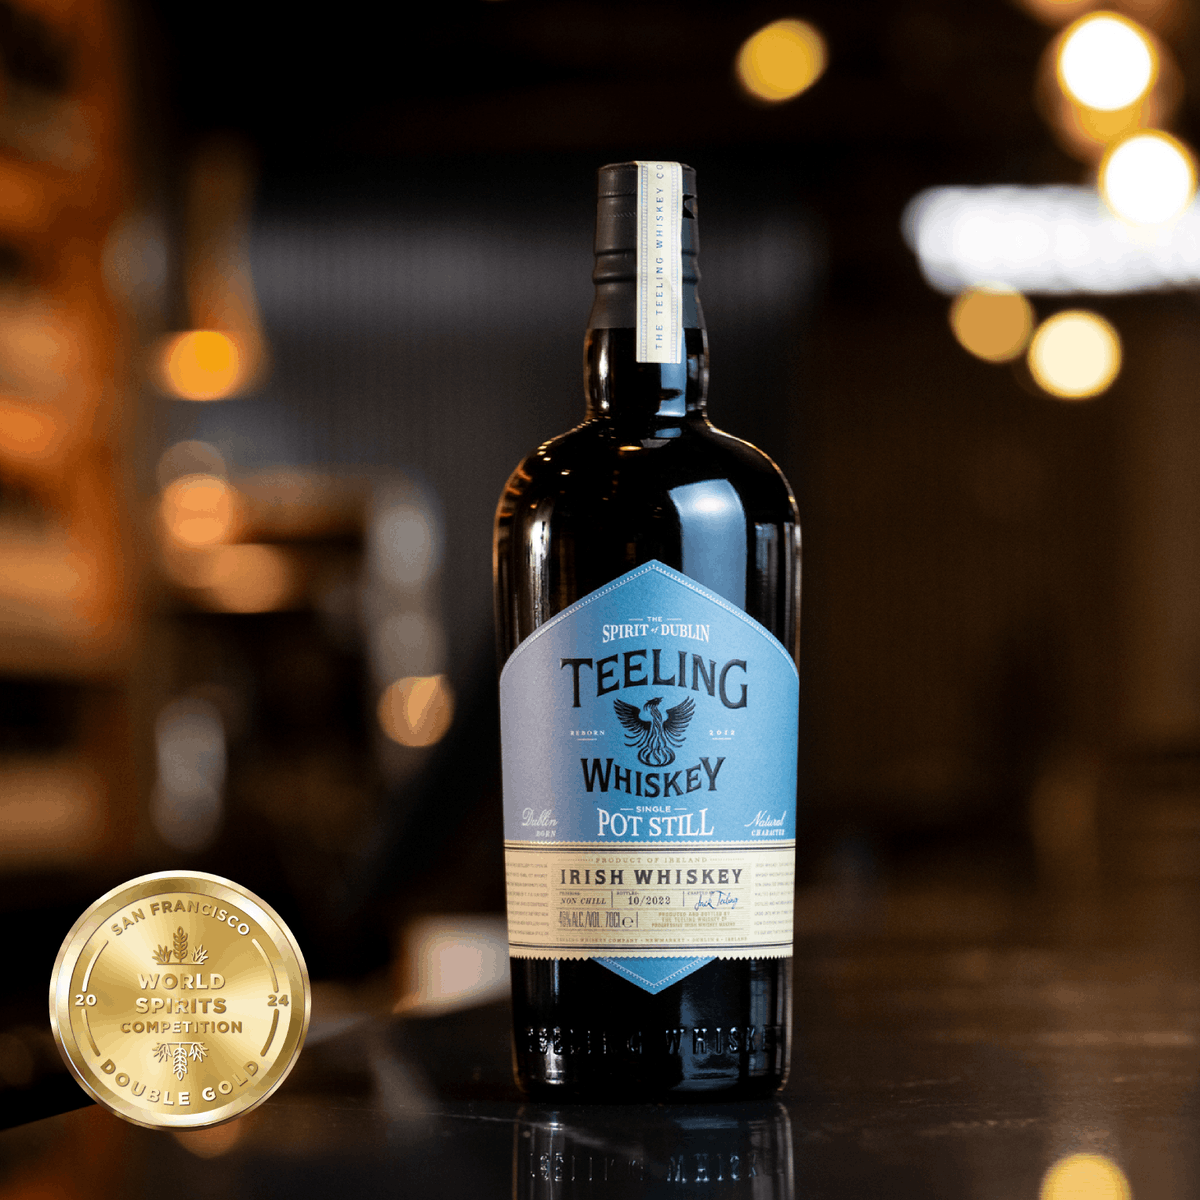 Double Gold Glory for Teeling Whiskey this year at the San Francisco Spirits Awards! We are delighted to announce that we picked up 3 Top Awards for our Small Batch, Single Pot Still, and Wonders of Wood 3! That makes over 600 international awards over the last ten years!